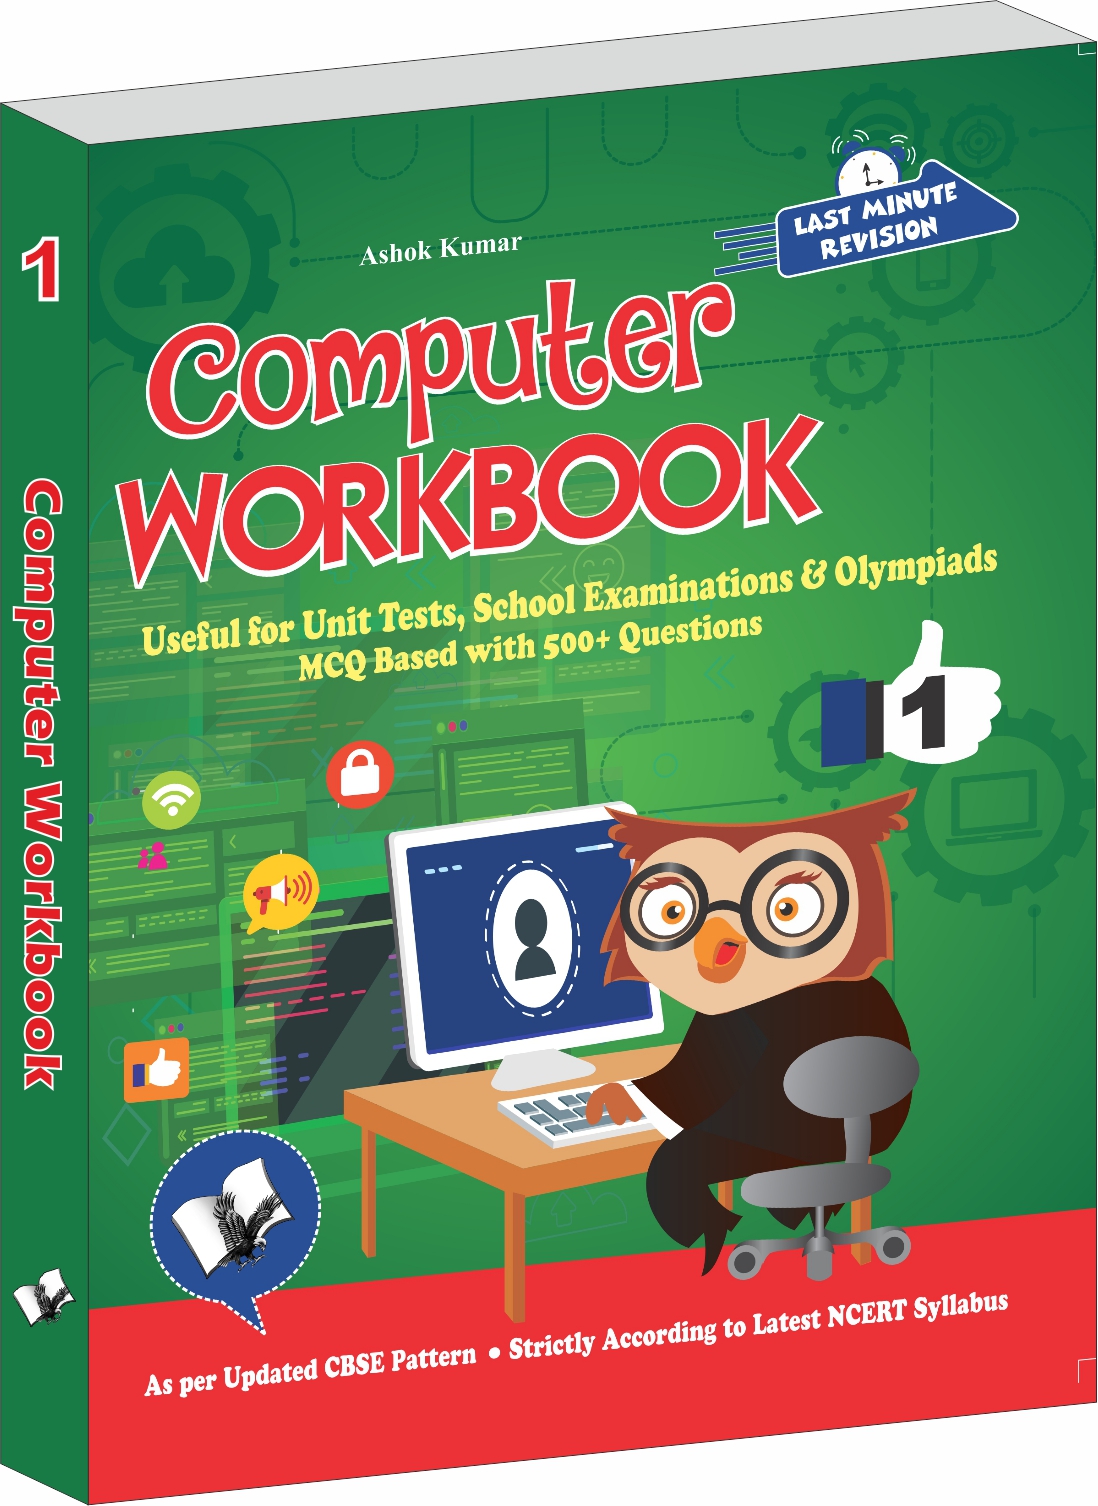 Computer Workbook Class 1-Useful for Unit Tests, School Examinations & Olympiads